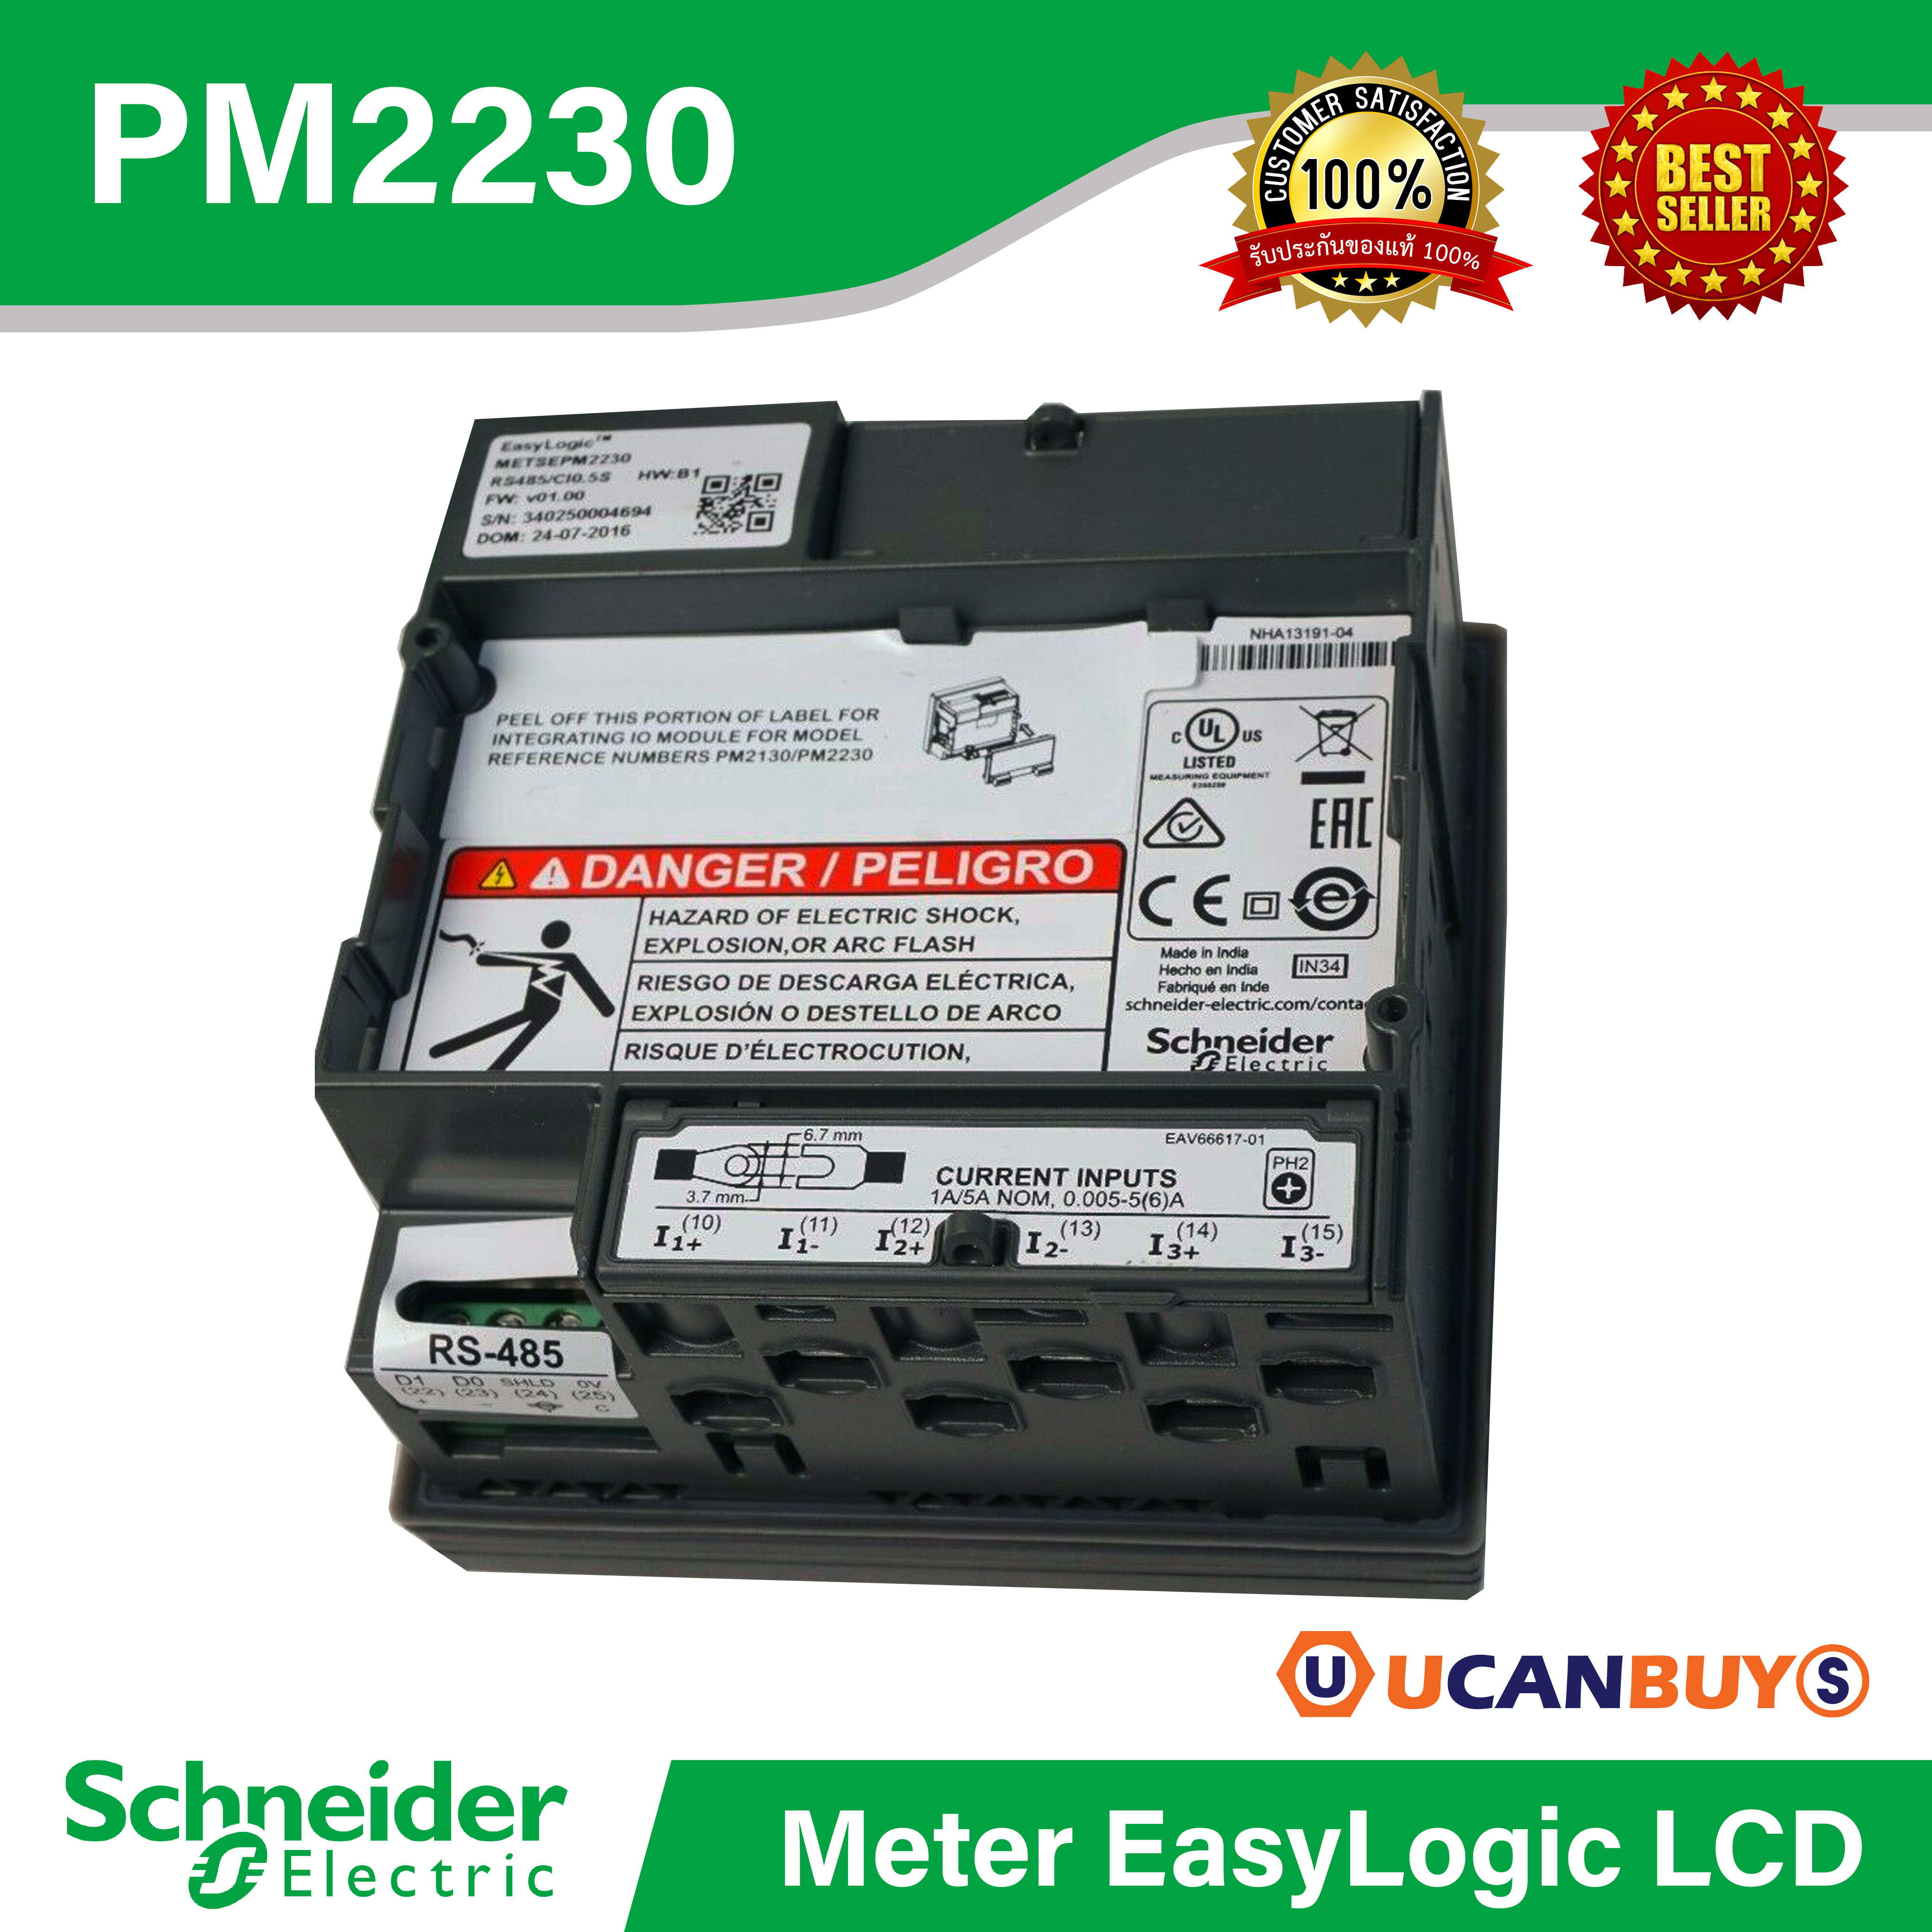 METSEPM2220 EasyLogic PM2220, Power & Energy meter, up to the 15th  harmonic, LCD display, RS485, class 1 - Detopsy Electrical Shop